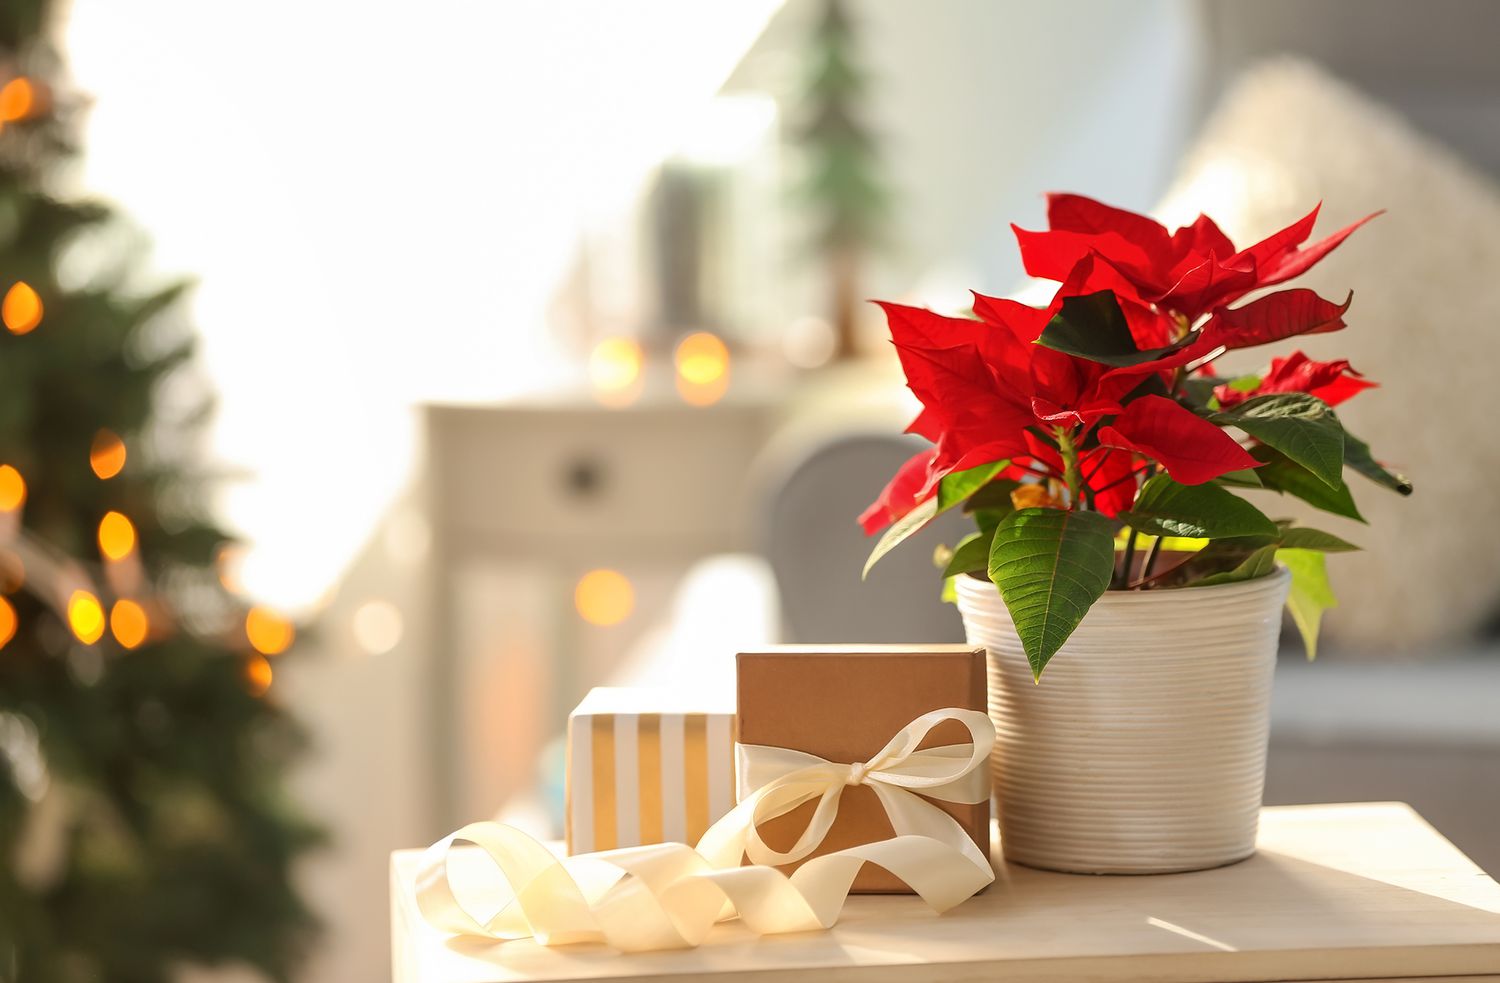 holiday-poinsettia-tips-getty-1119.jpg&profile=RESIZE_710x